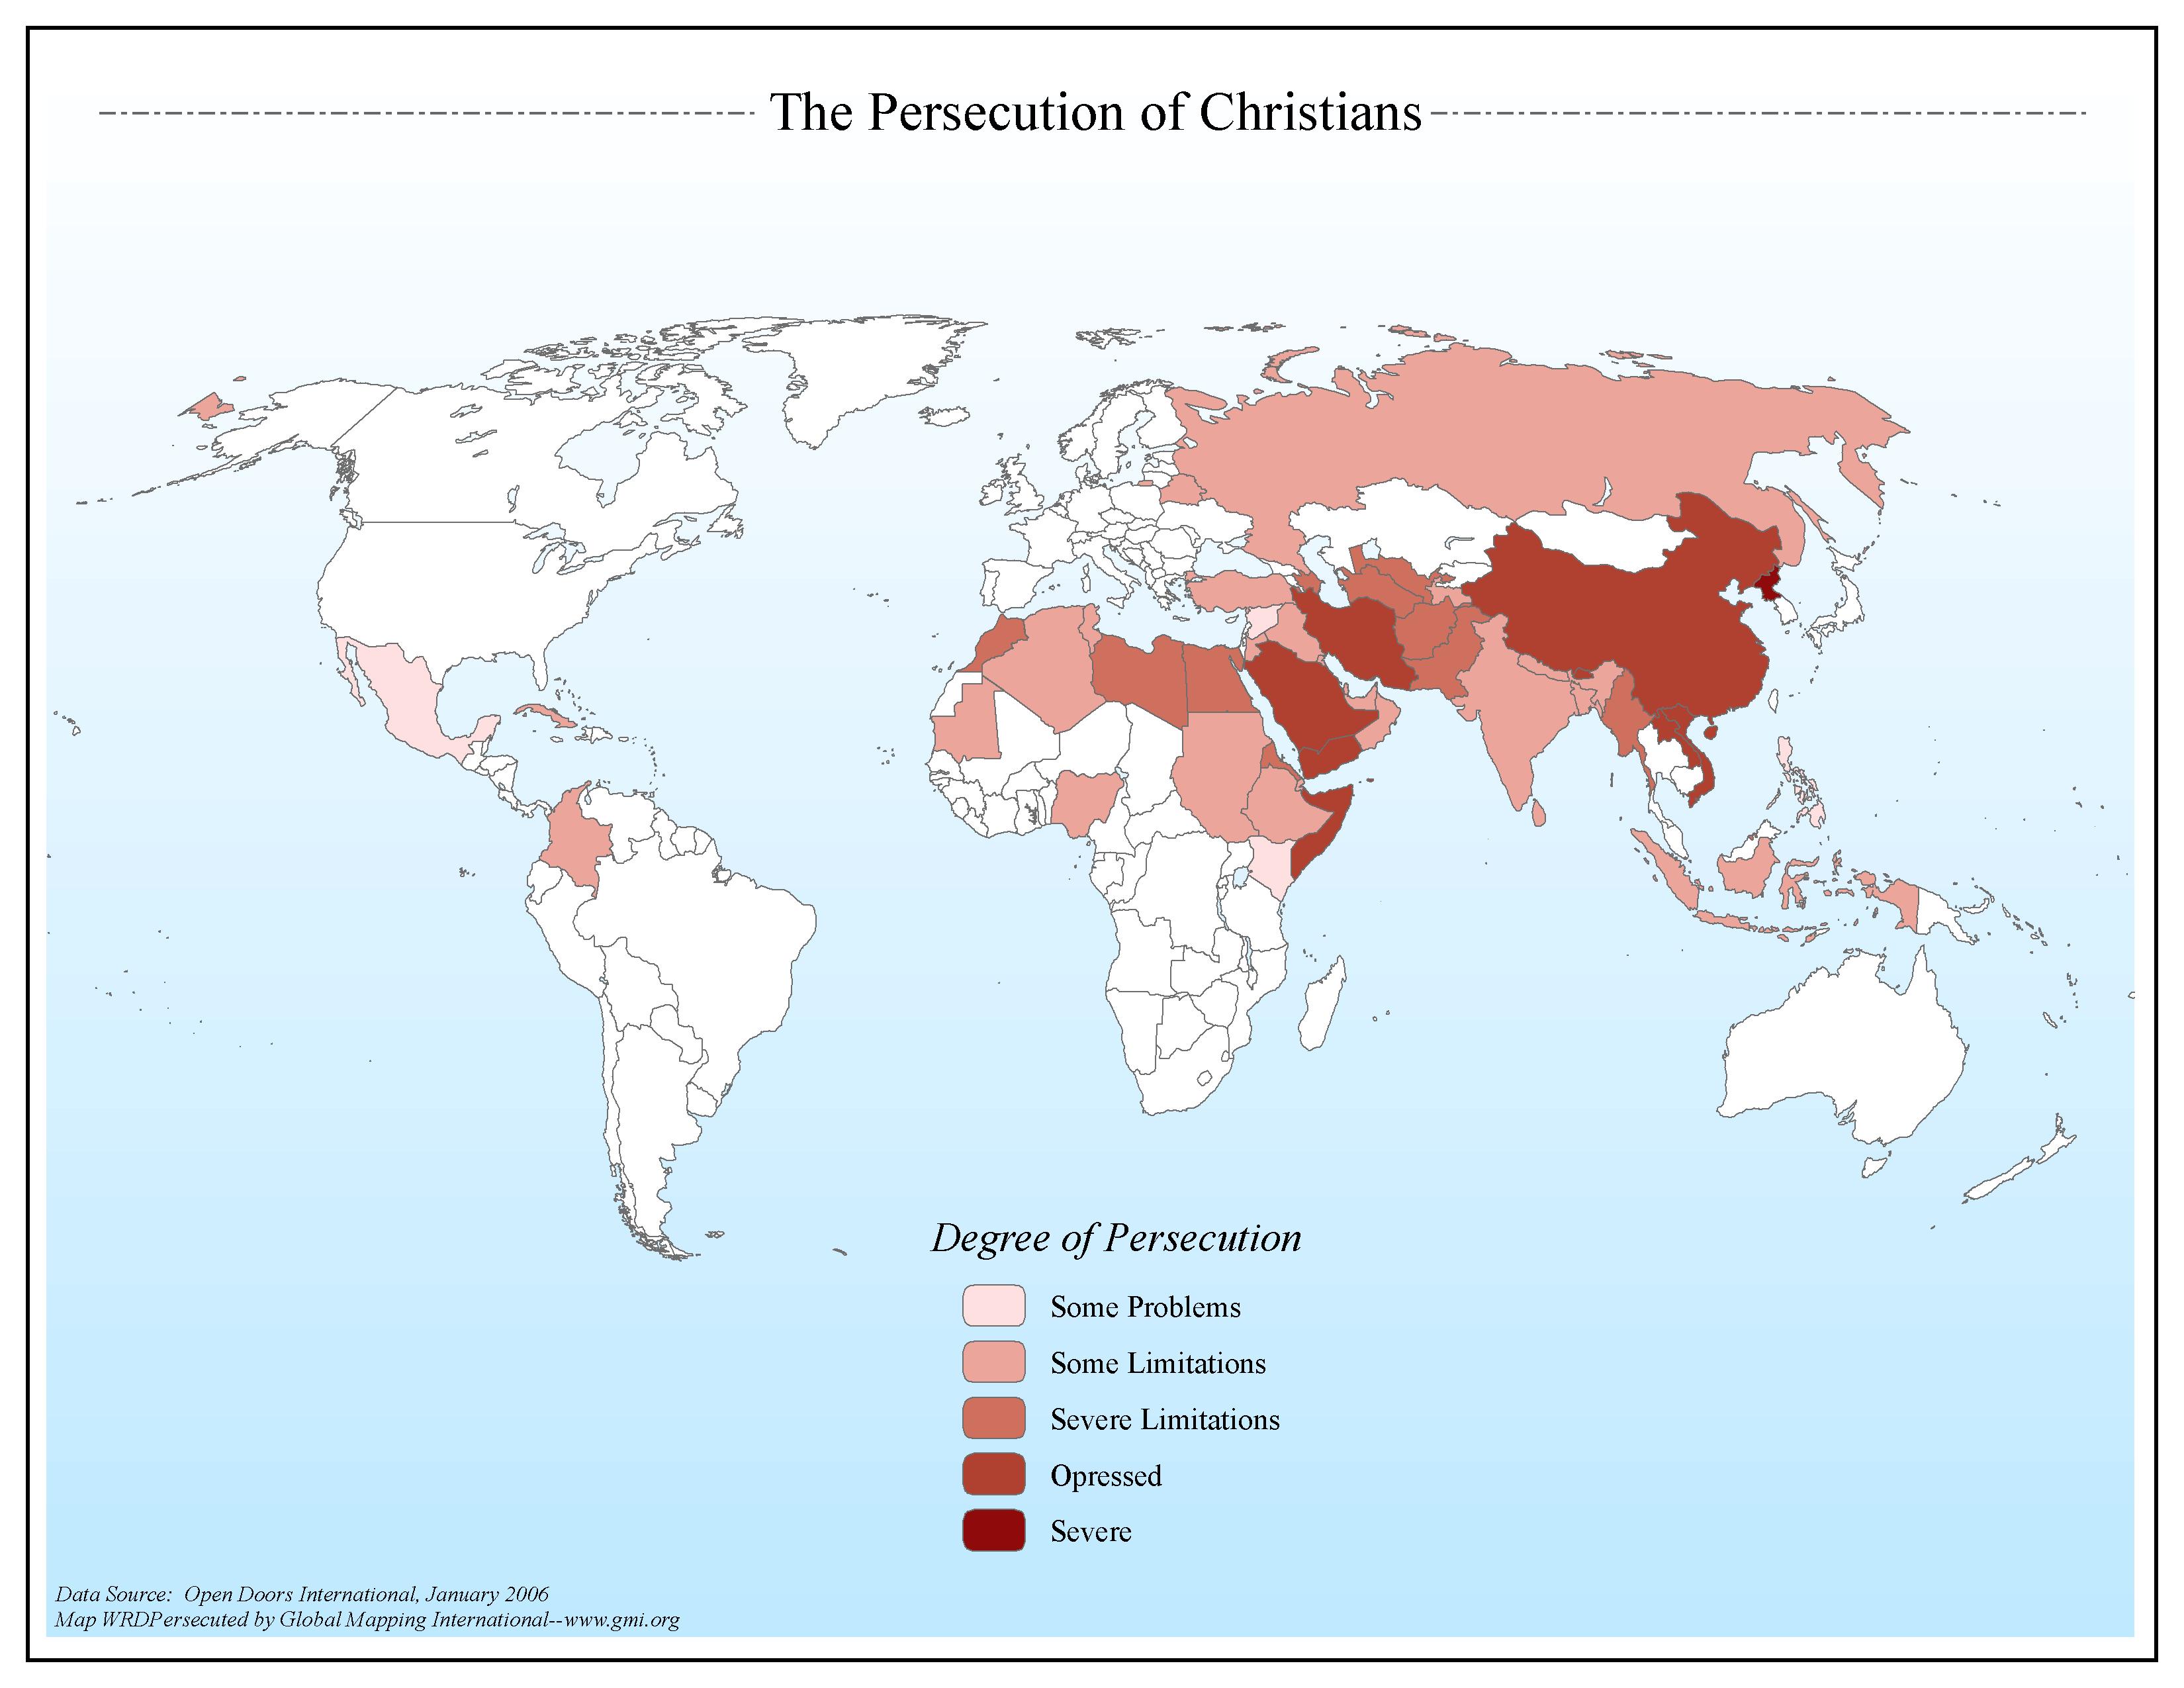 The Persecution of Christians